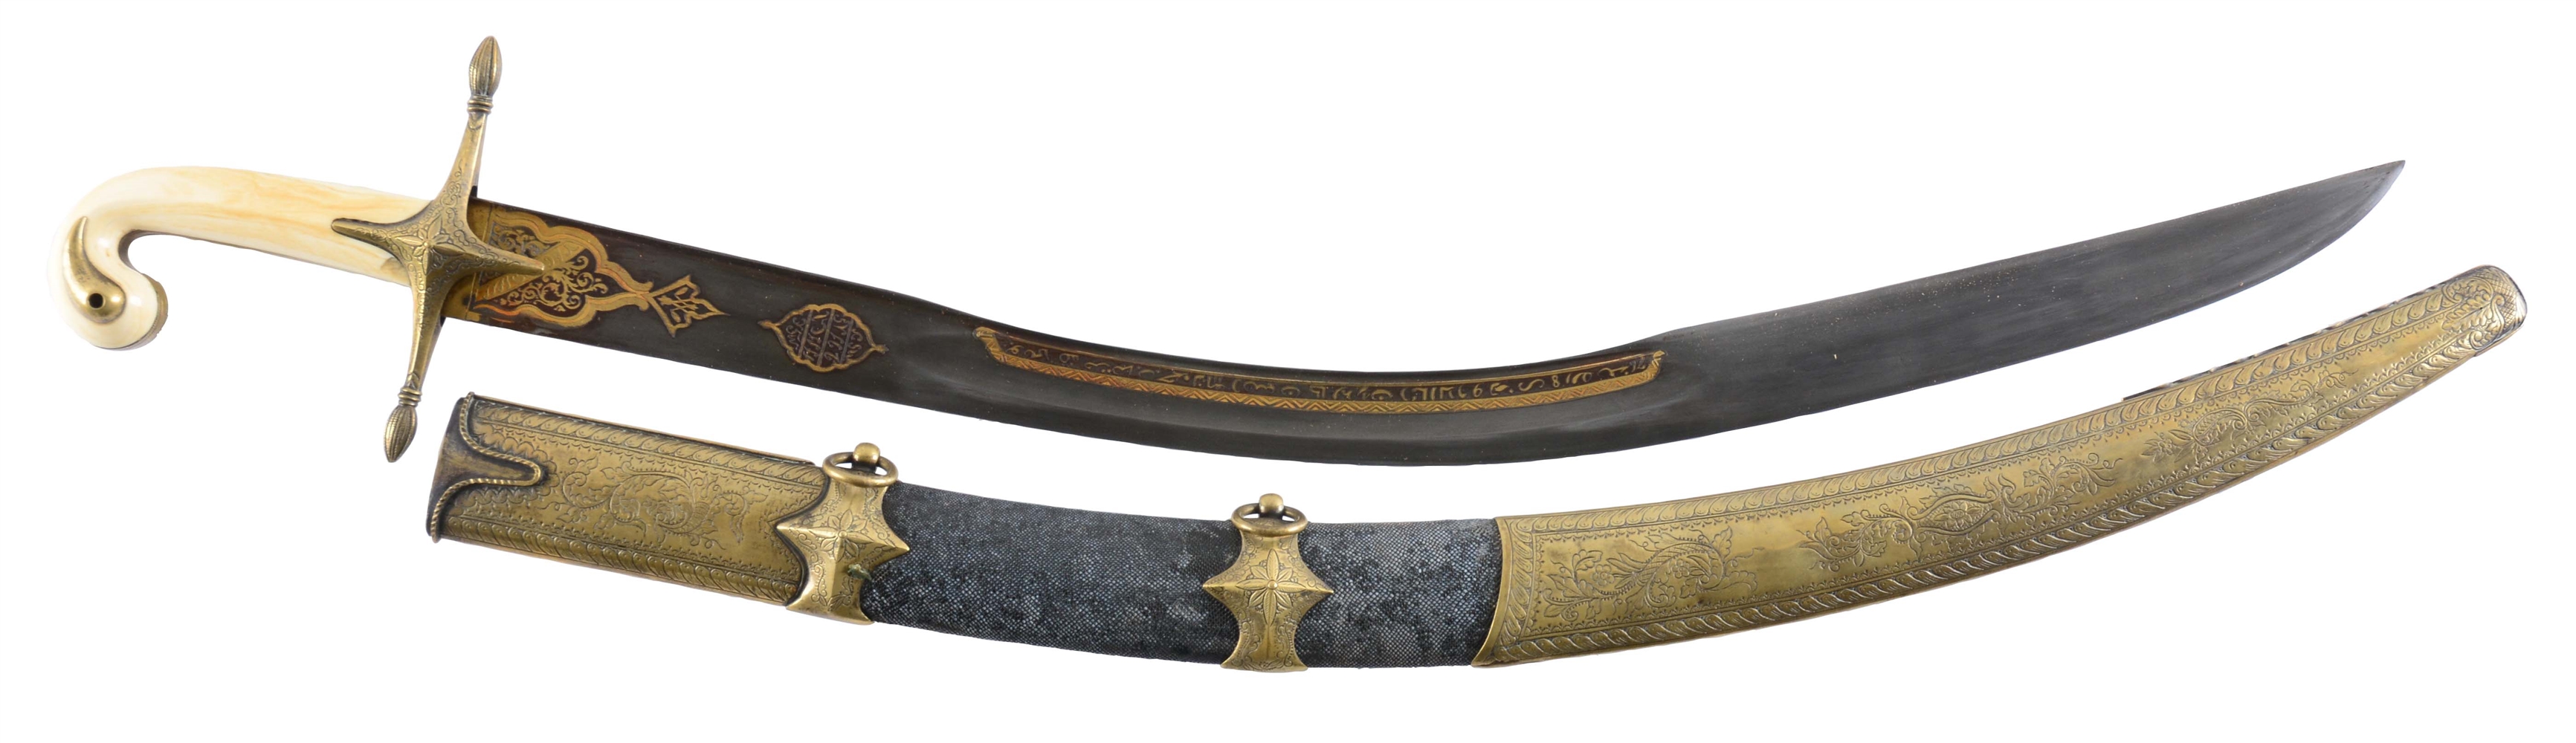 VERY FINE 18TH CENTURY HUNGARIAN SABER OF KILIJ FORM IN THE OTTOMAN MANNER WITH SCABBARD.